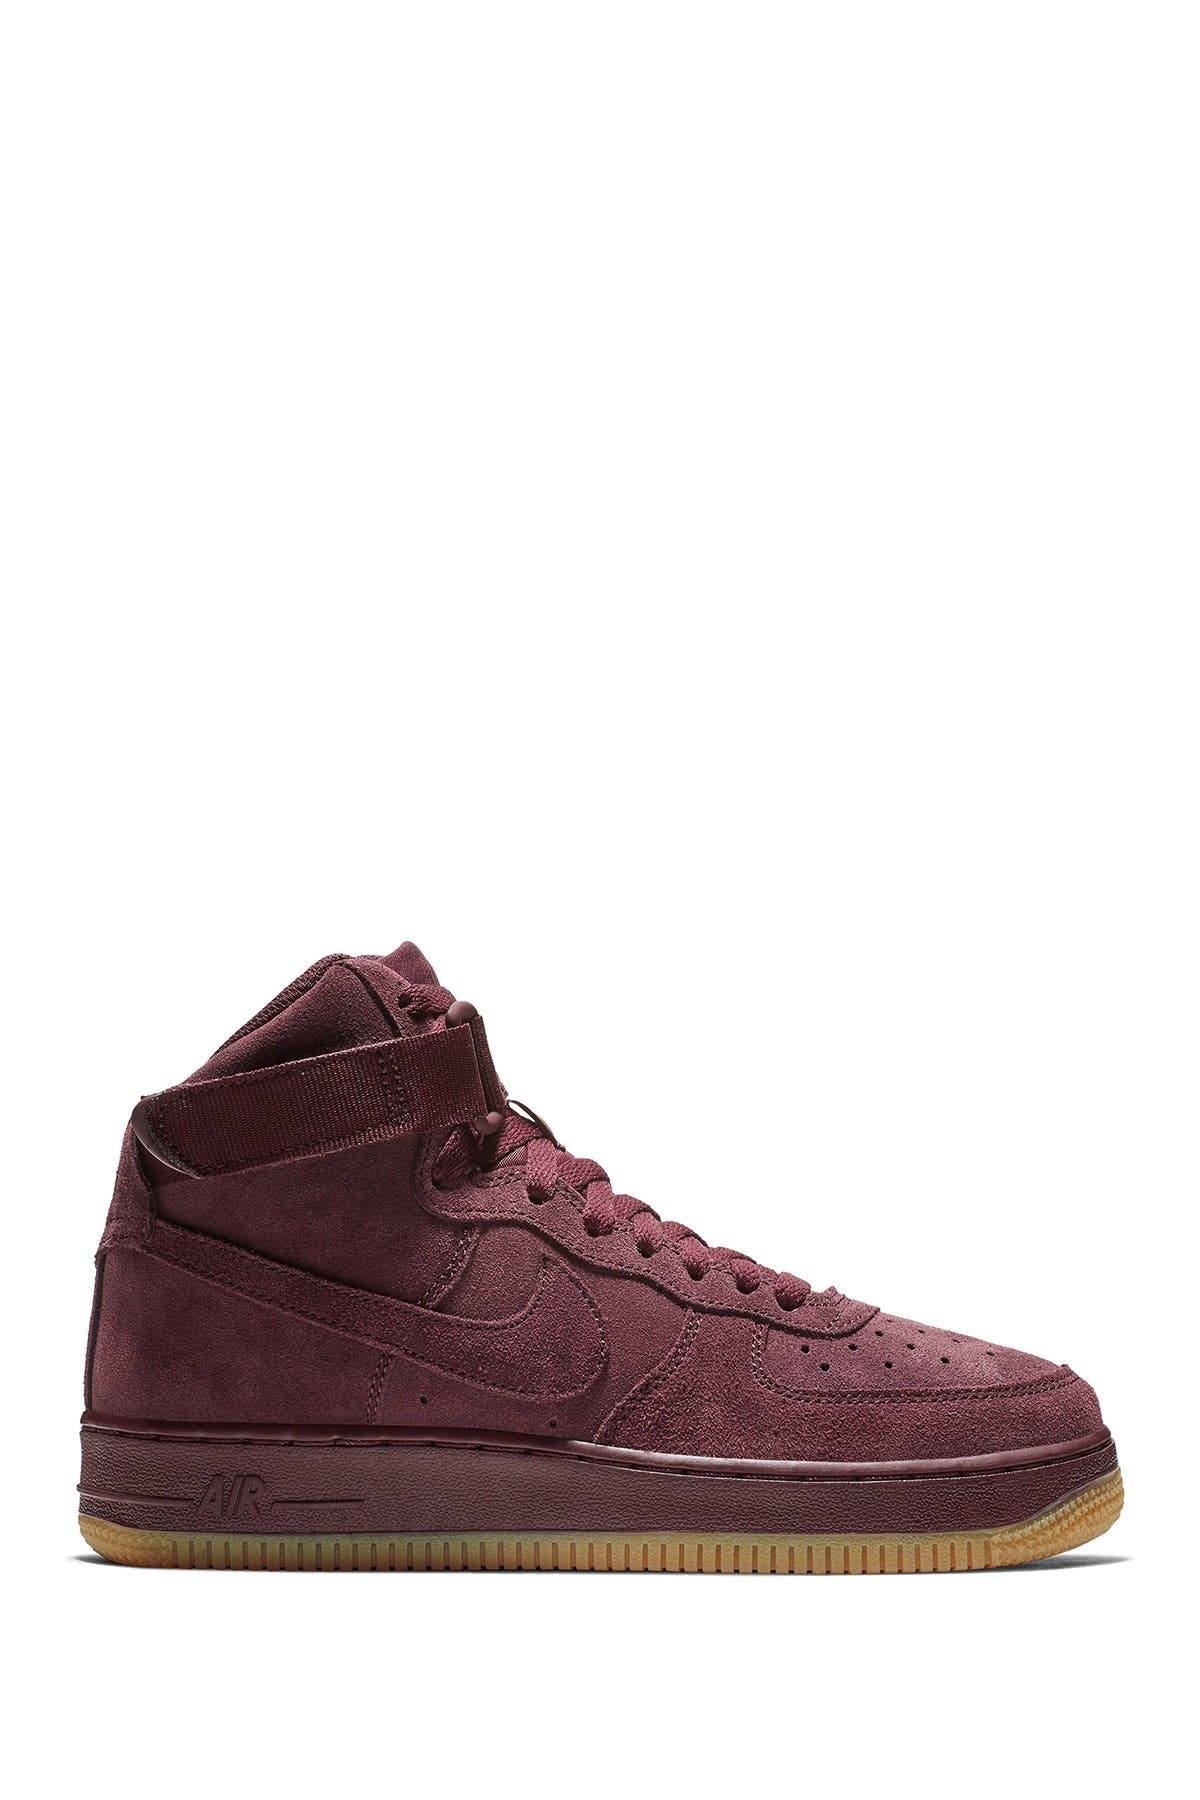 air force 1 high top suede